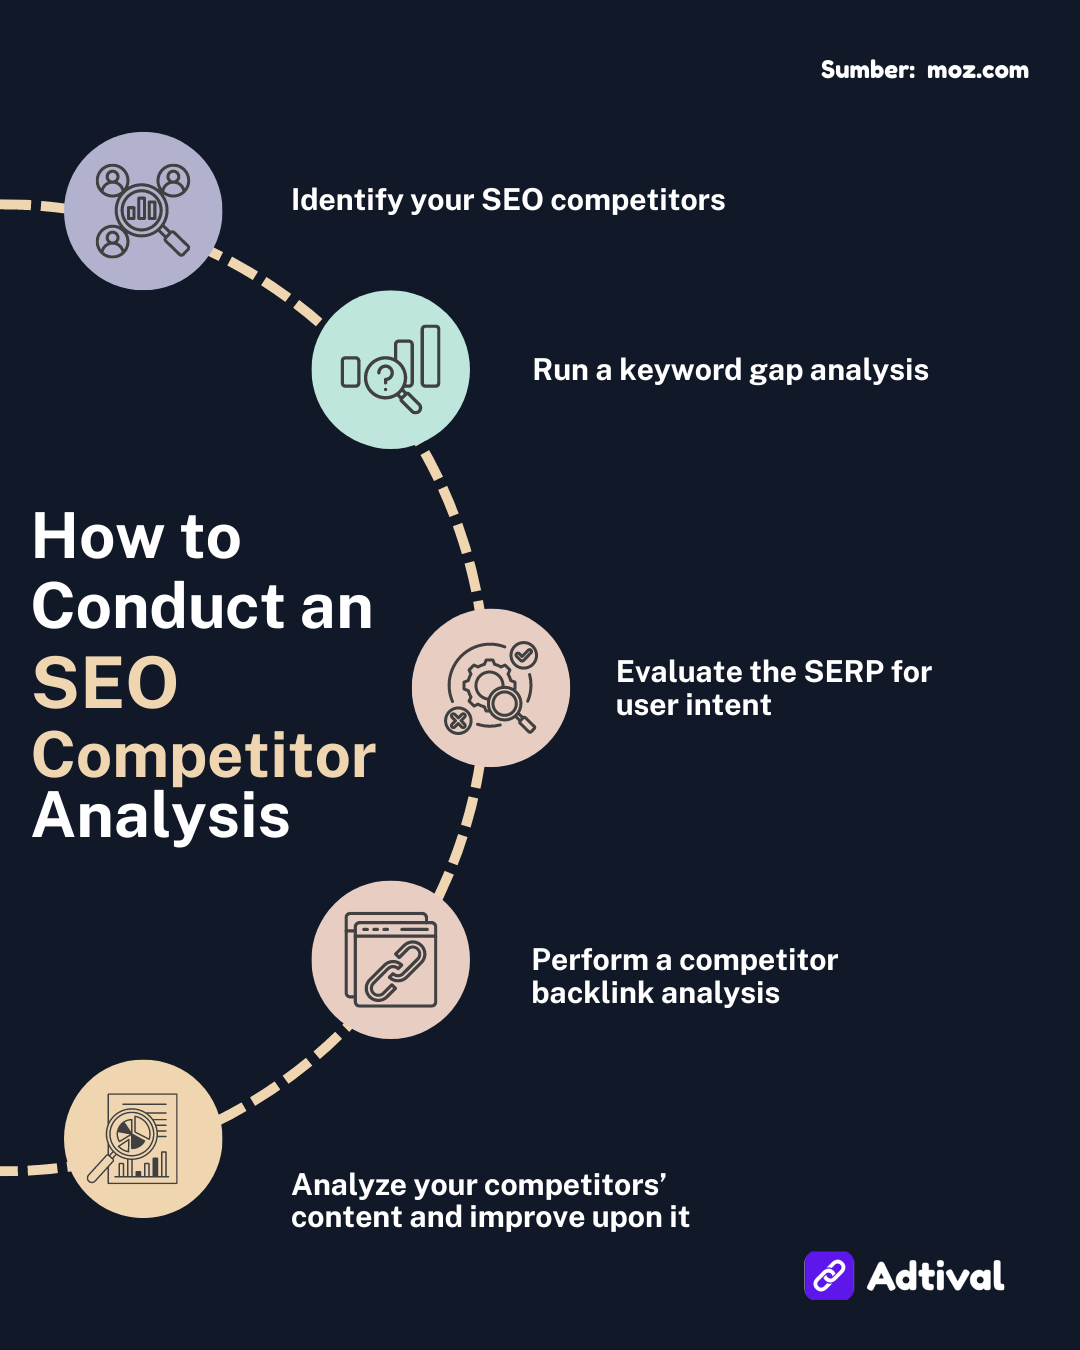 How to Conduct an SEO Competitor Analysis